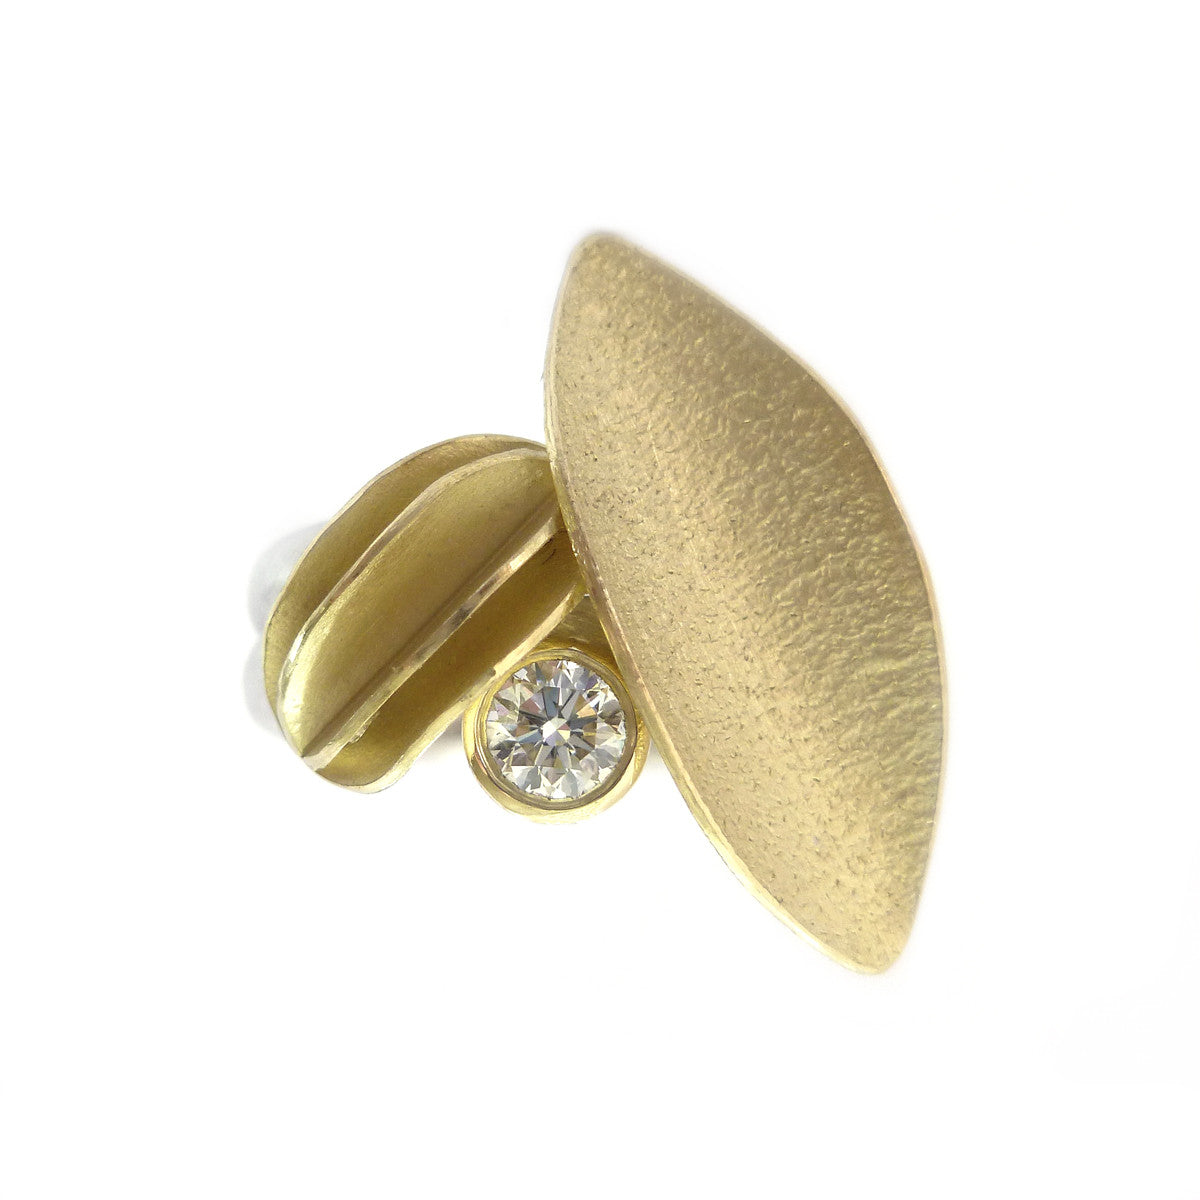 18k Gold and Diamond Ring (OF14) - Sue Lane Contemporary Jewellery - 1